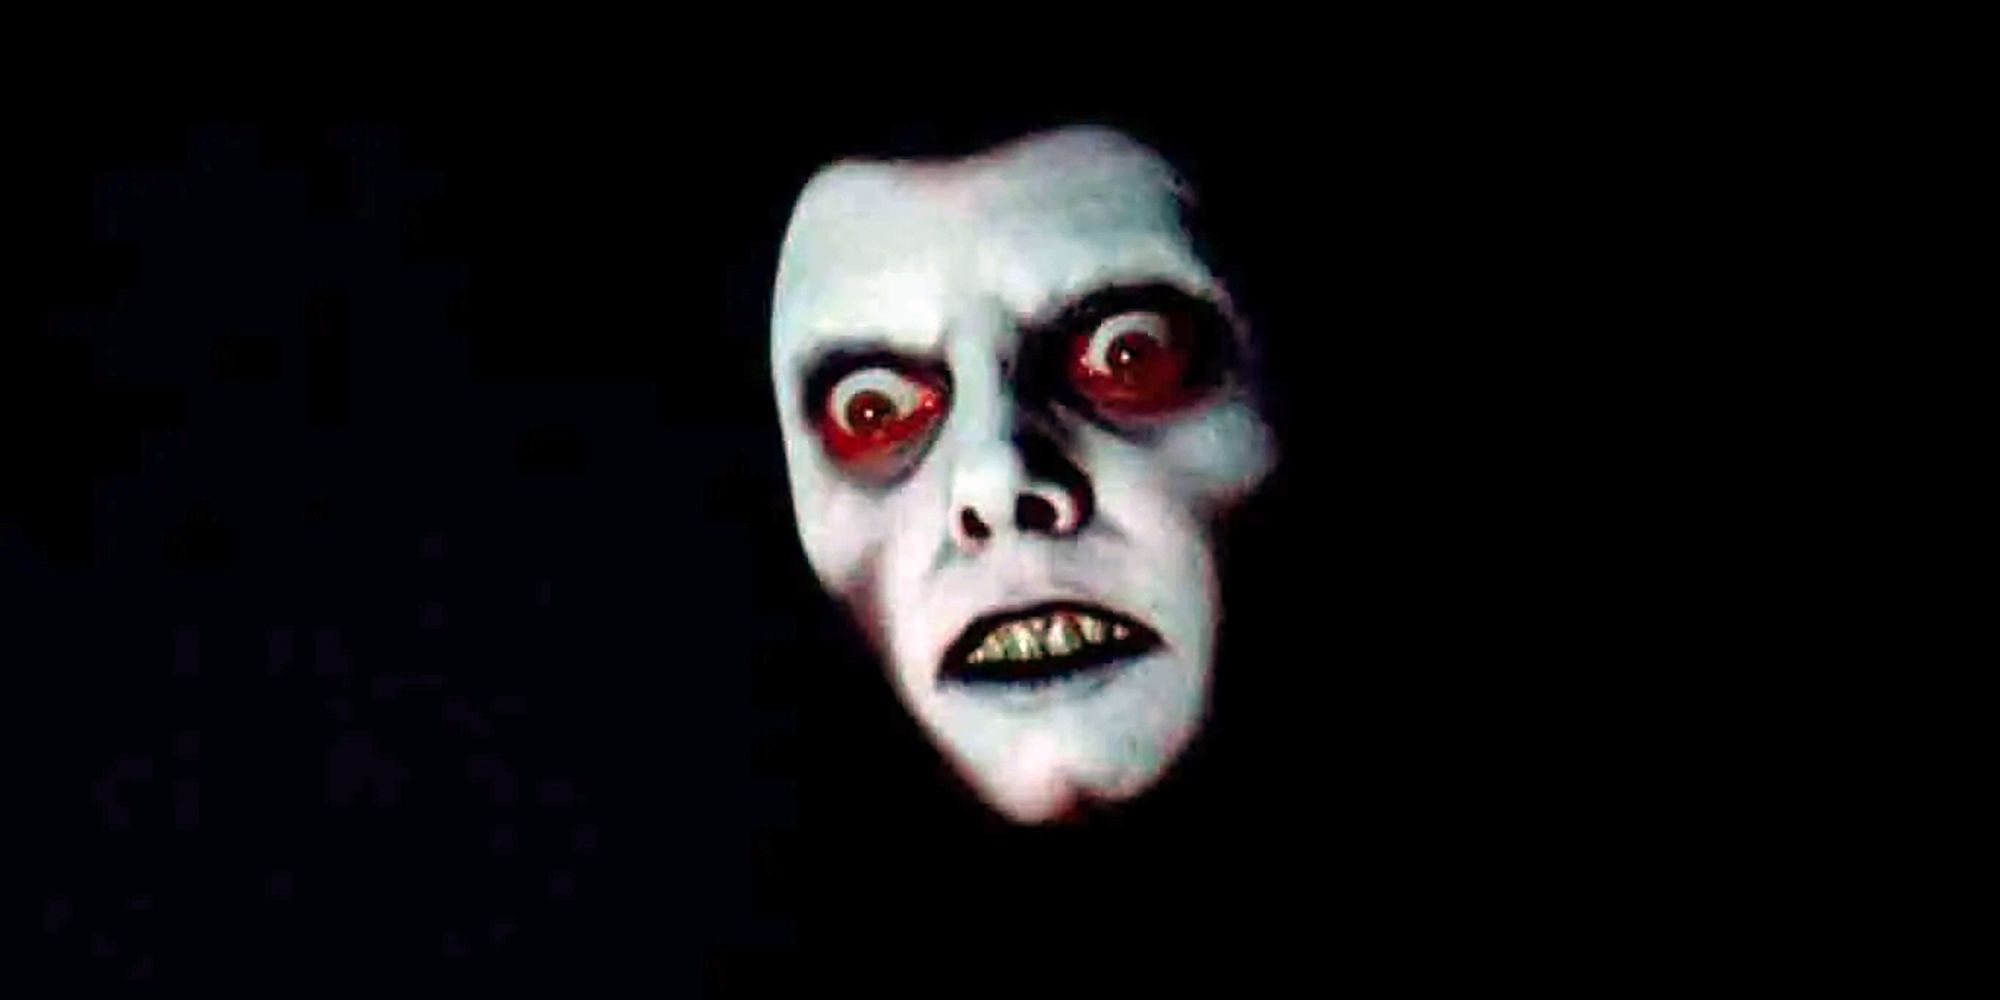 The demon Pazuzu's face emerging from the dark in The Exorcist.